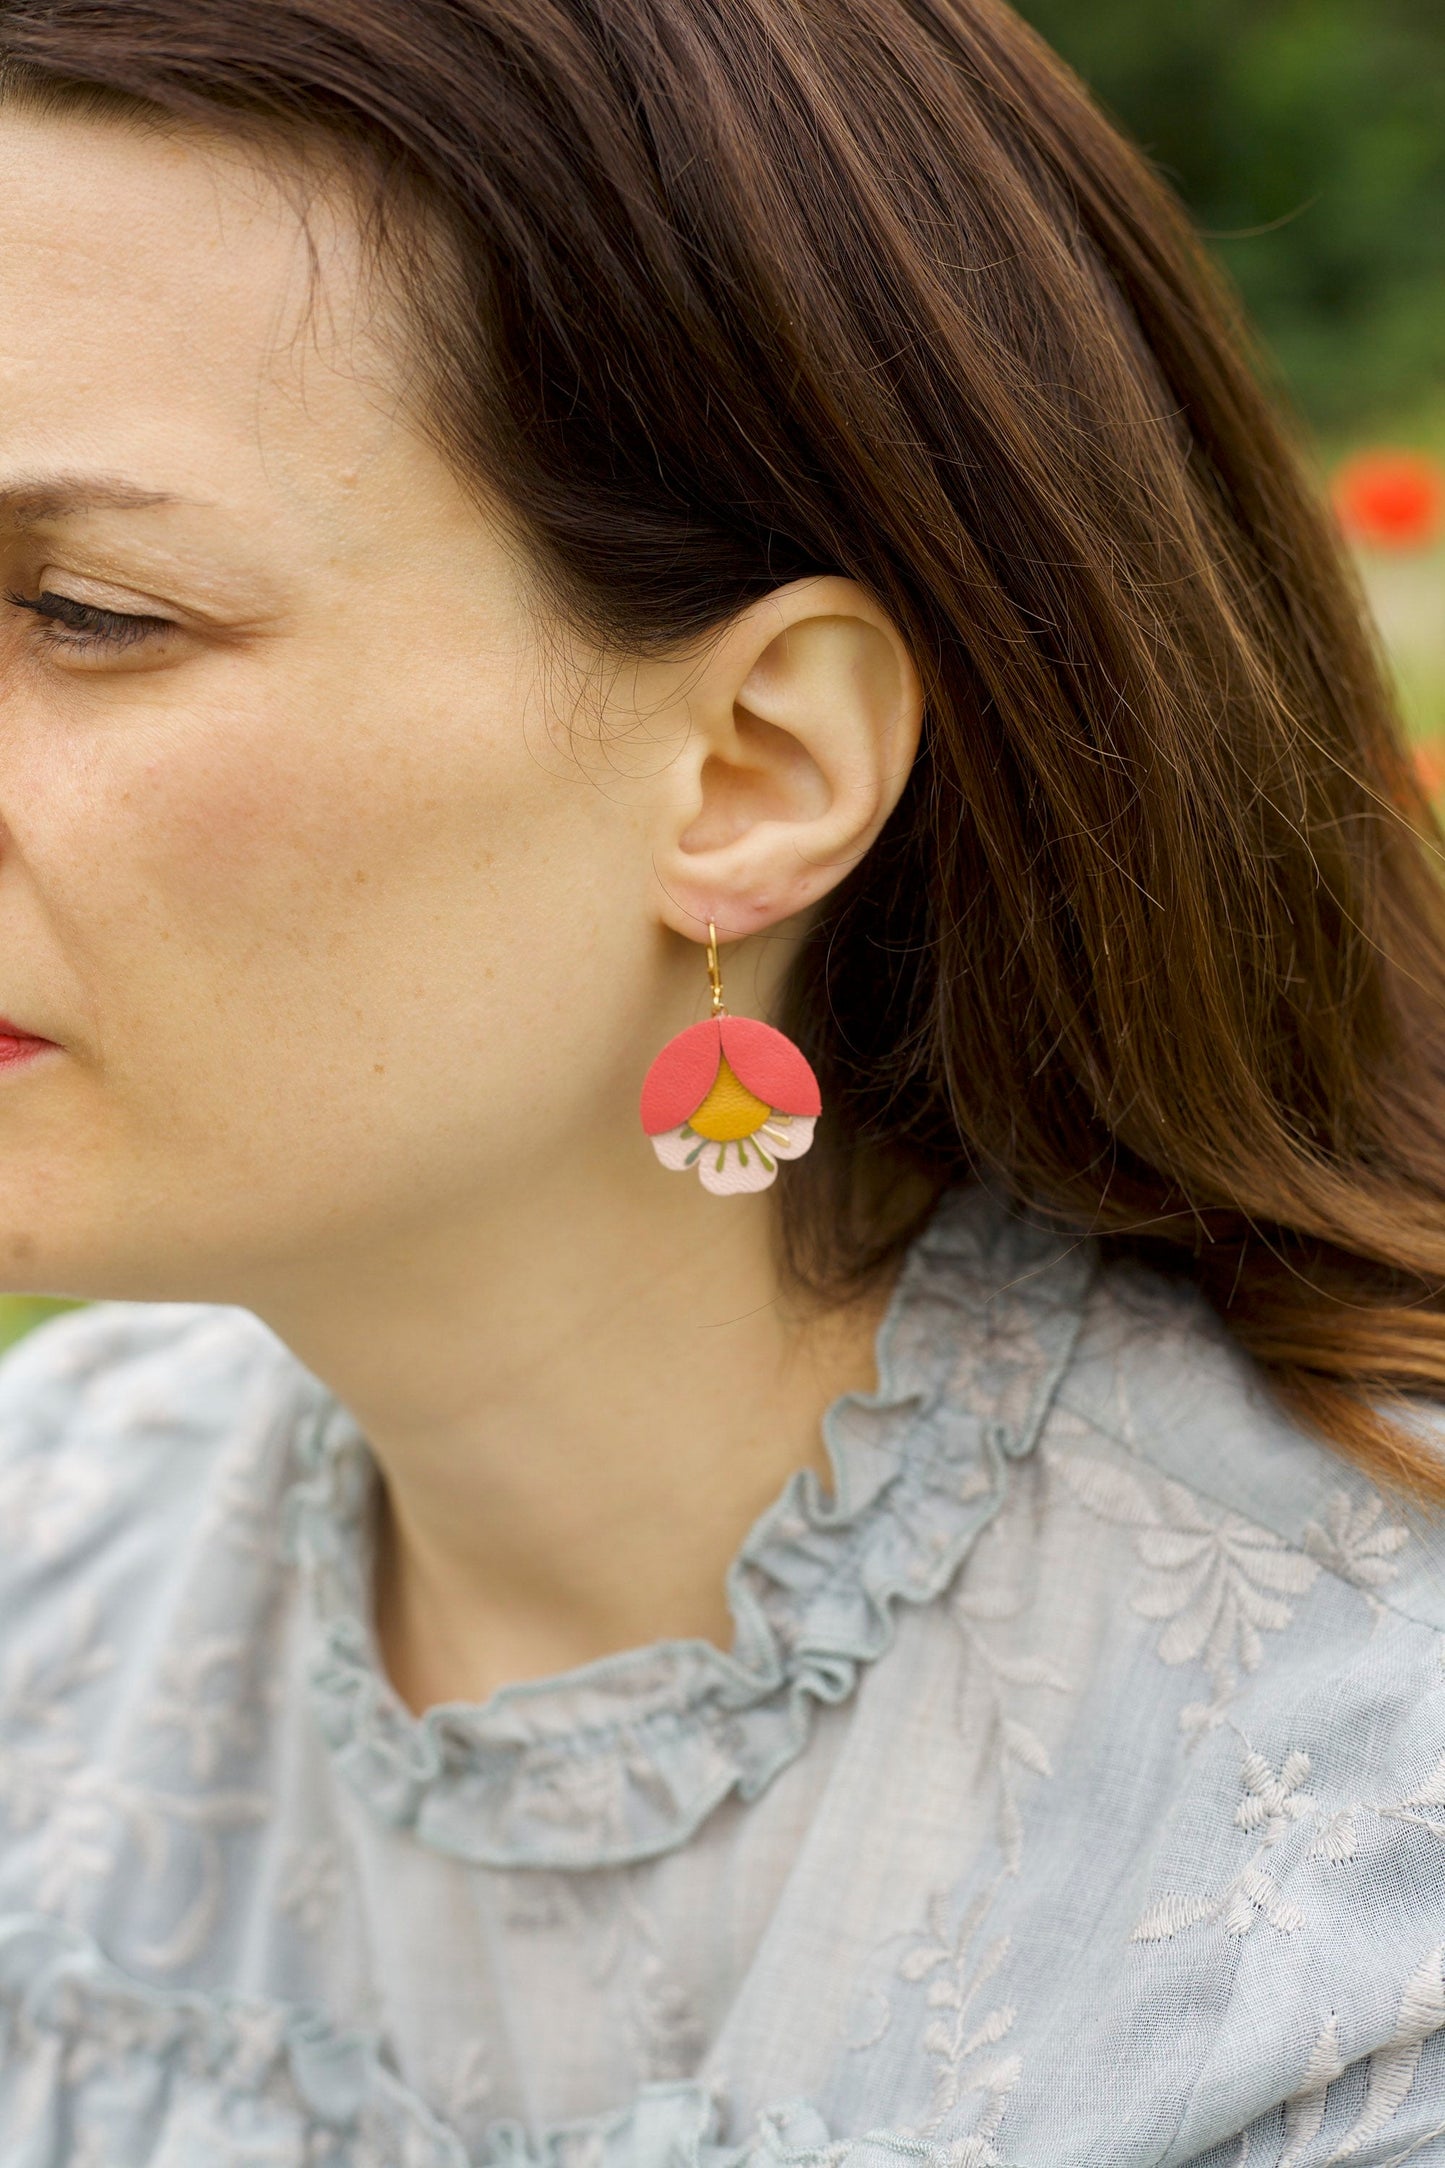 Cherry blossom earrings in coral yellow pink leather